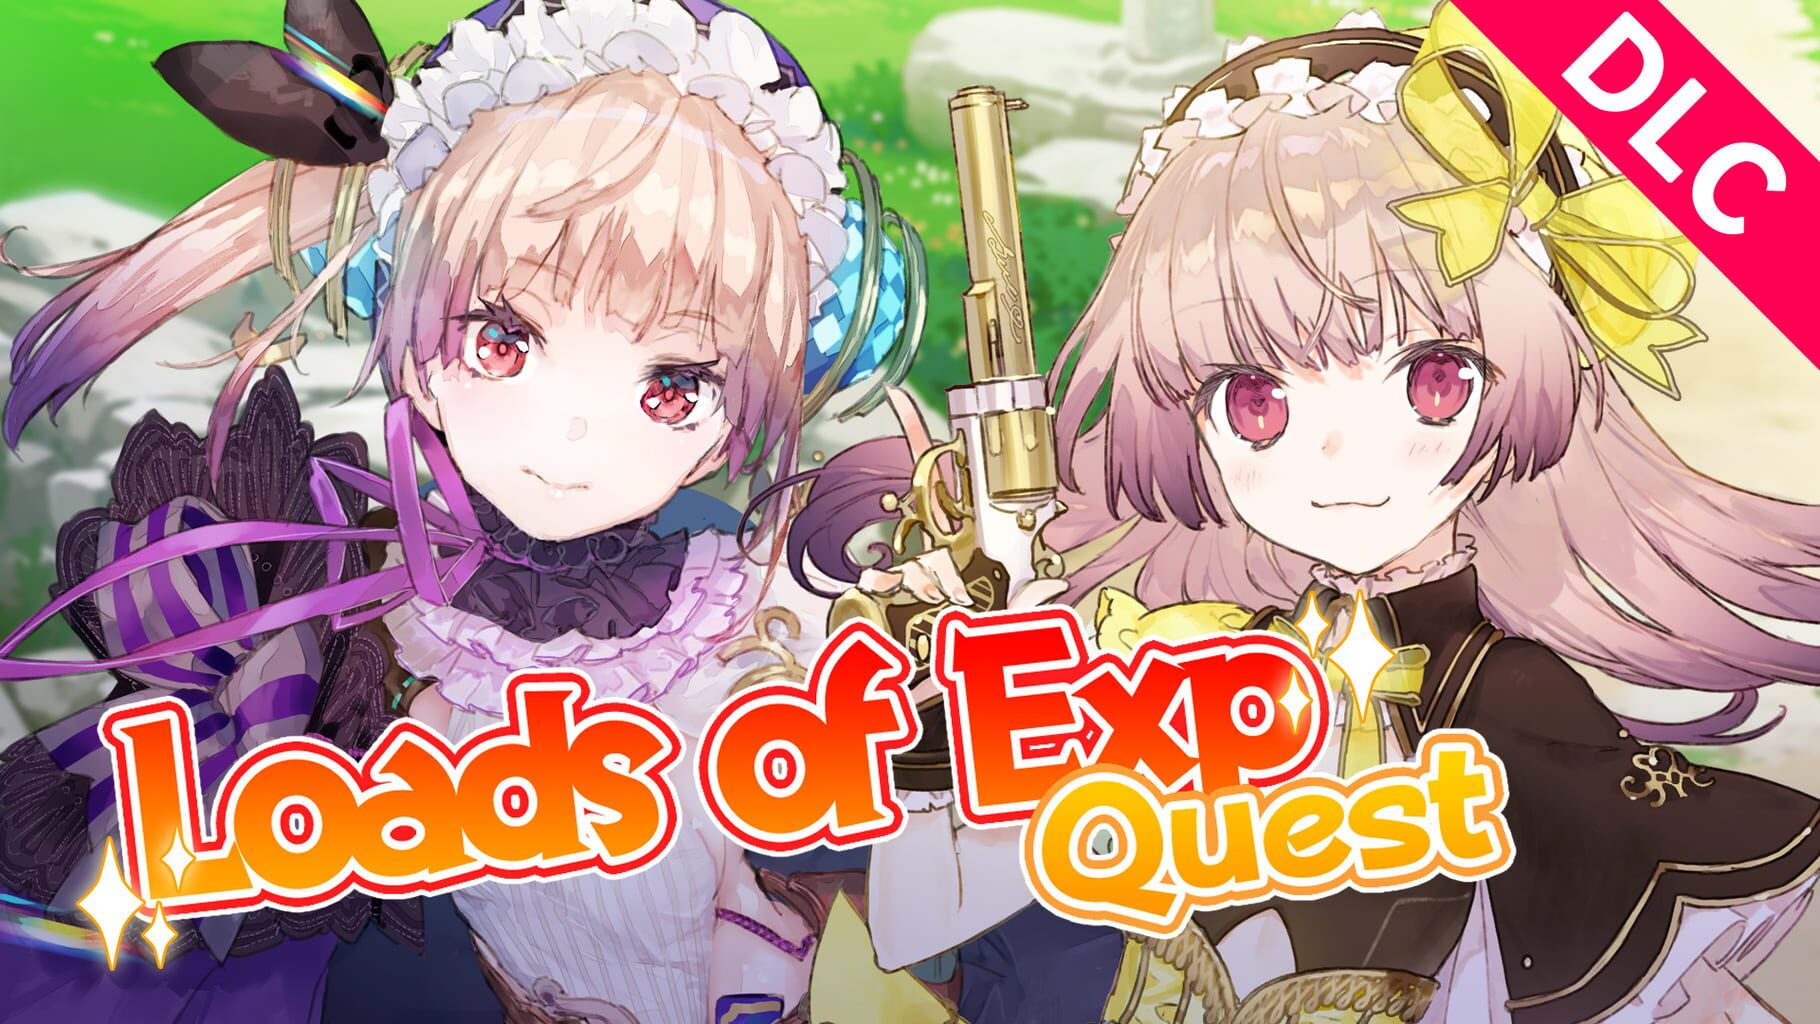 Atelier Lydie & Suelle: The Alchemists and the Mysterious Paintings - New Quest: Loads of Exp Quest artwork